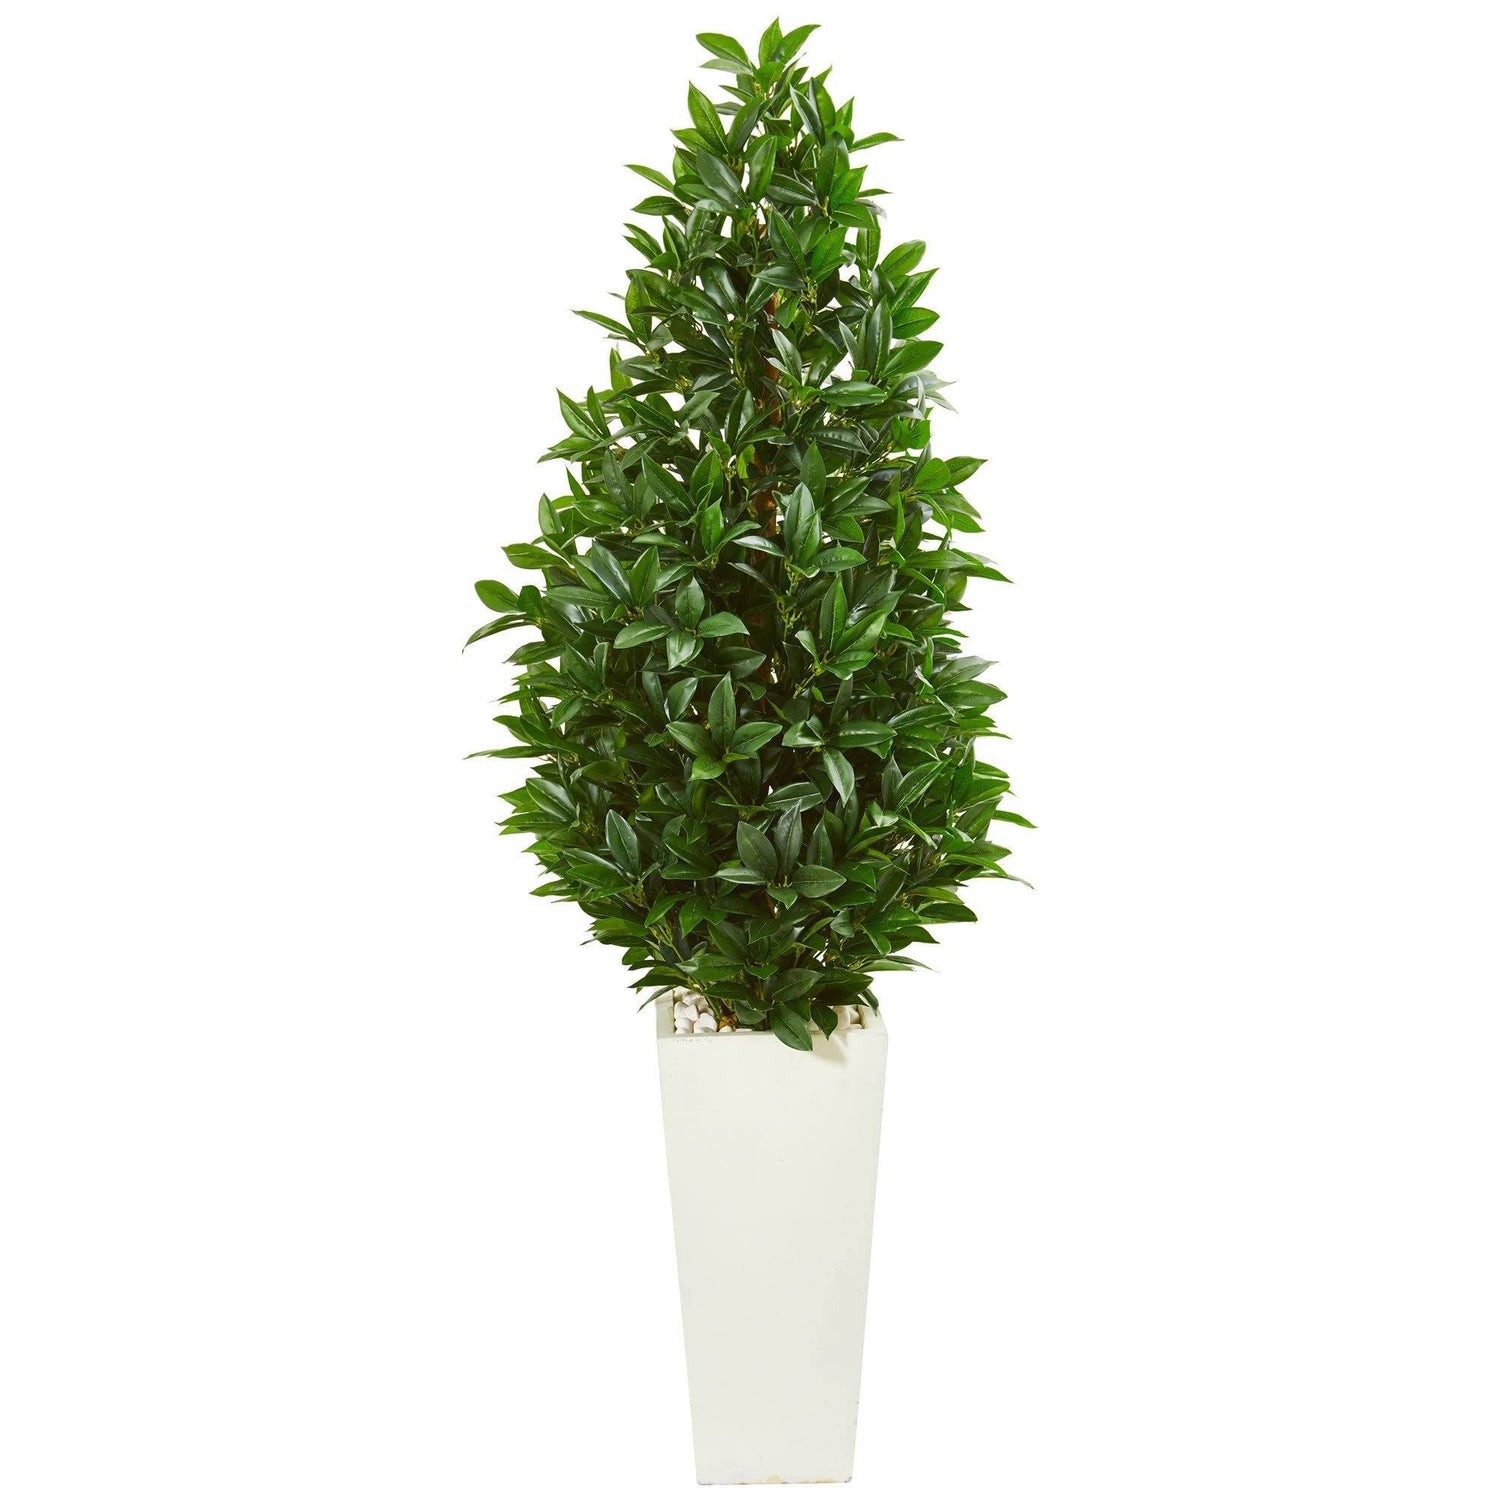 63” Bay Leaf Cone Topiary Artificial Tree in White Planter (Indoor/Outdoor)